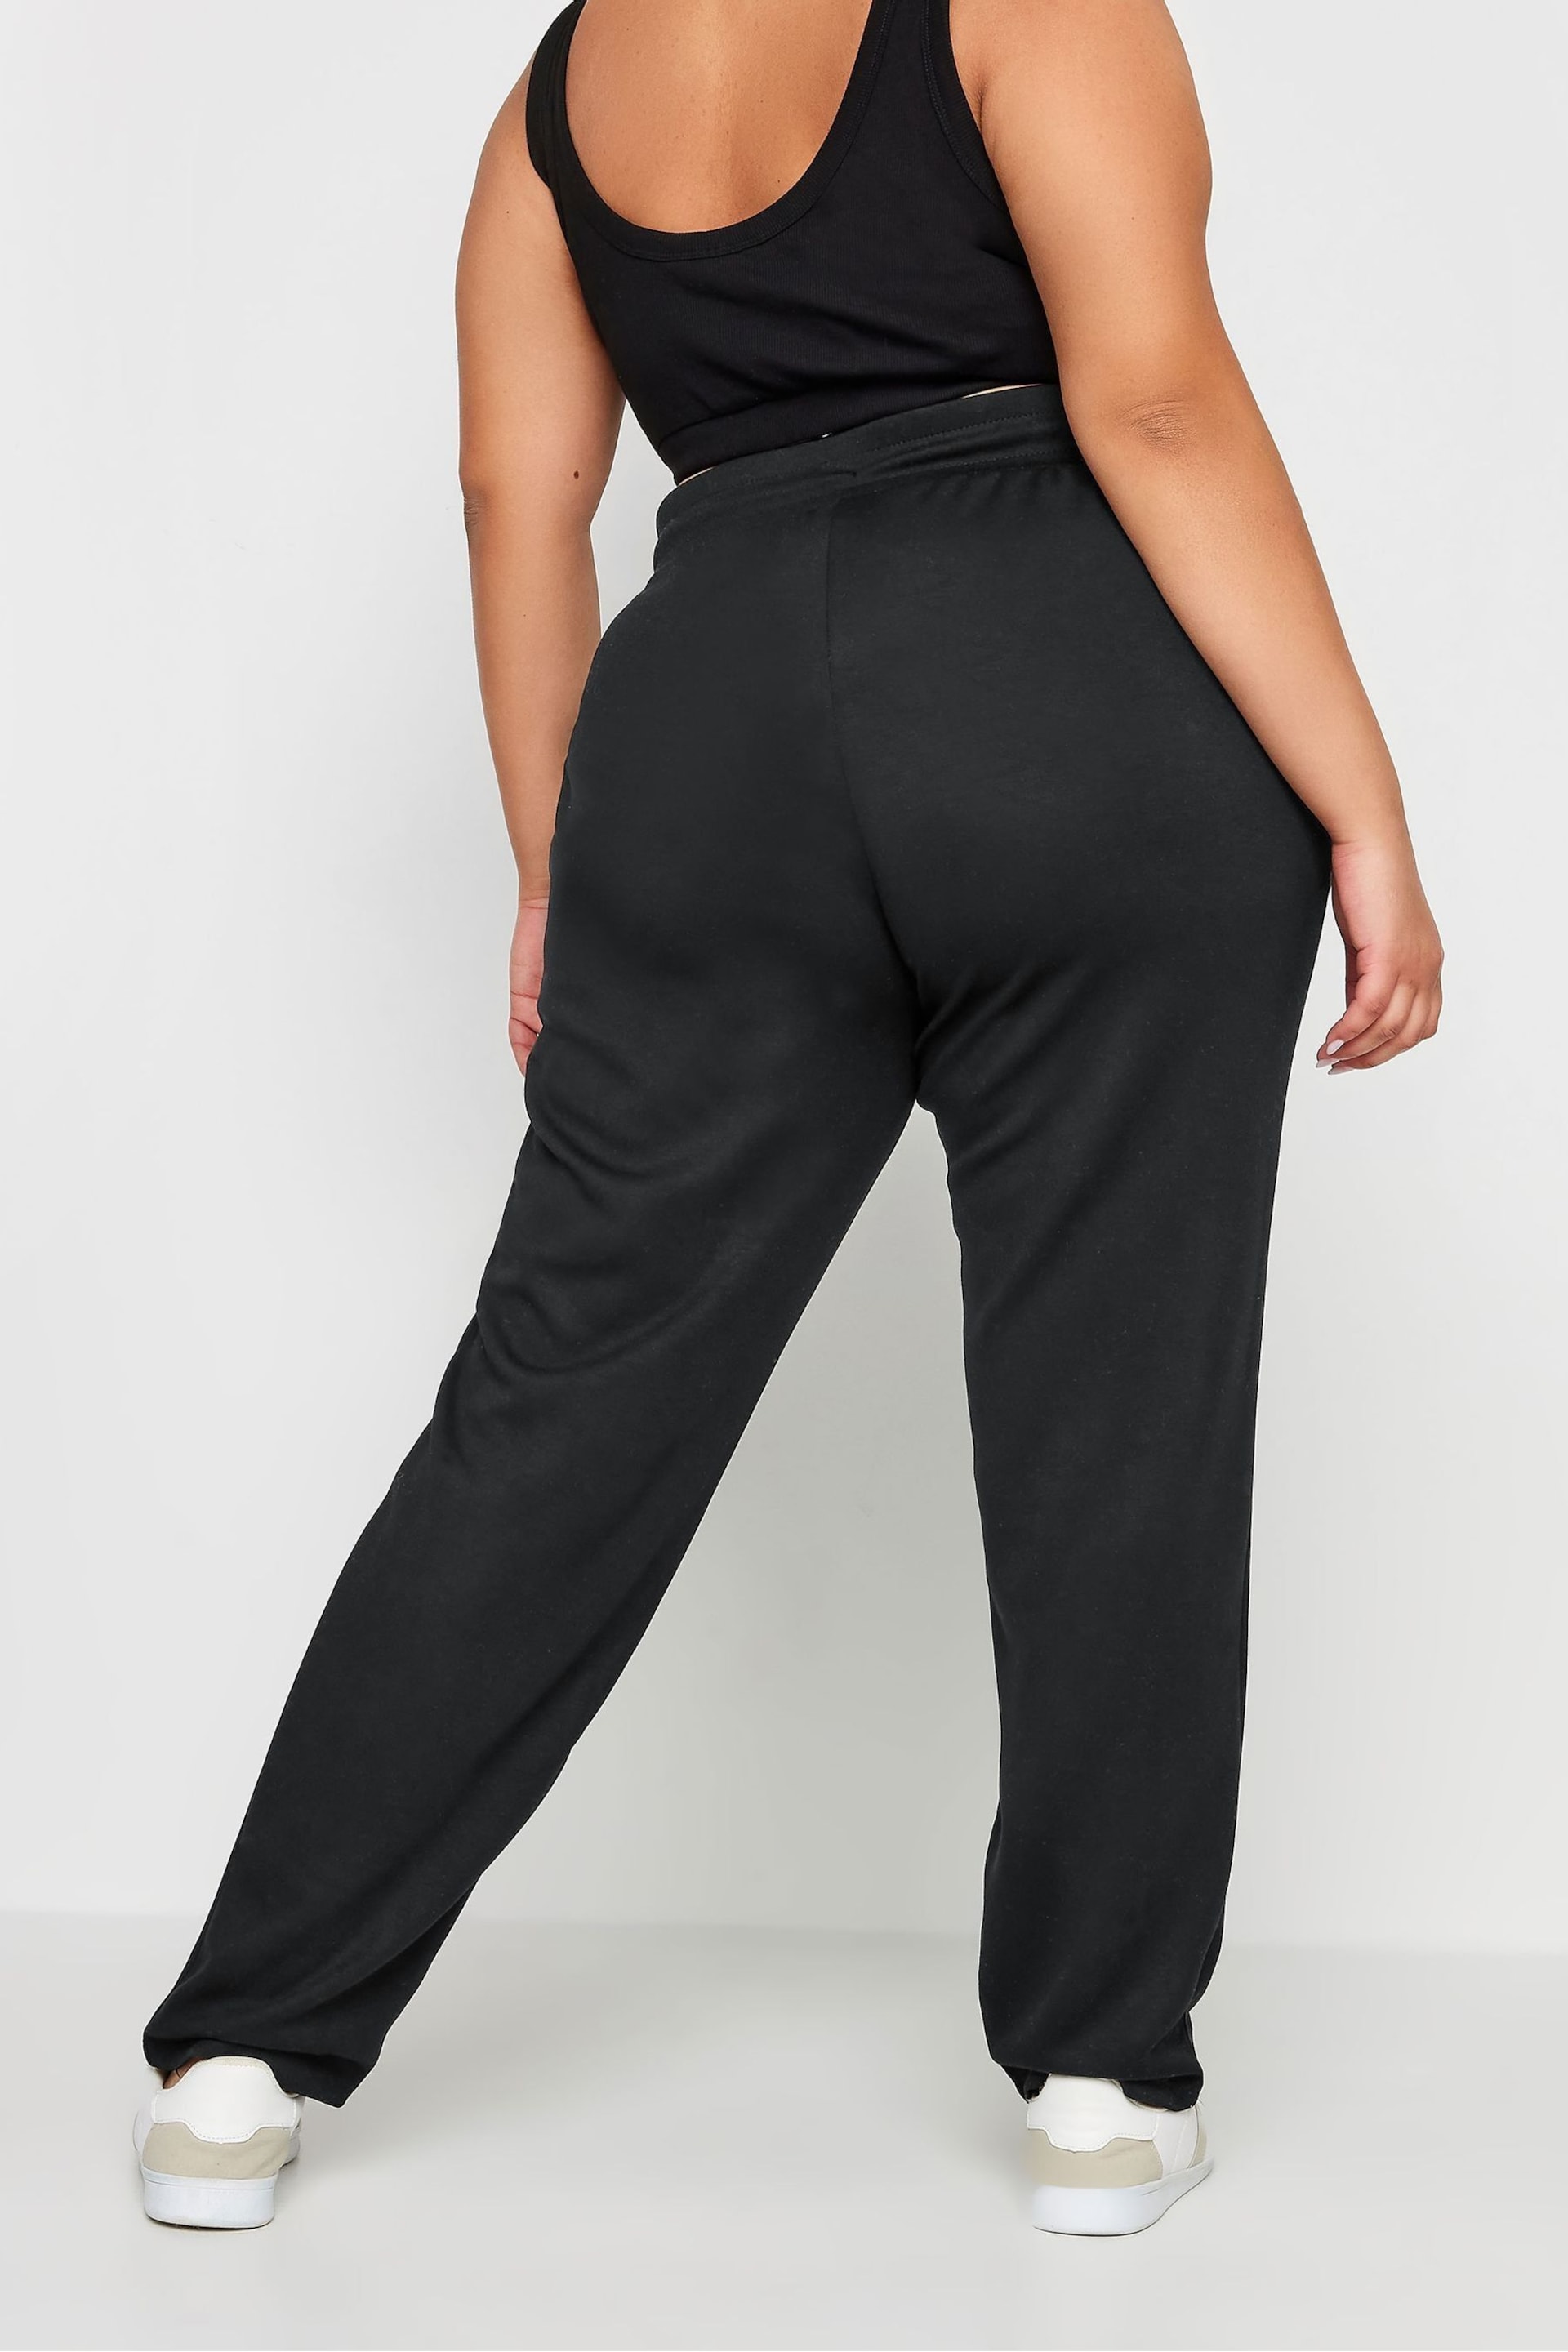 Yours Curve Black Straight Leg Stretch Joggers - Image 3 of 5